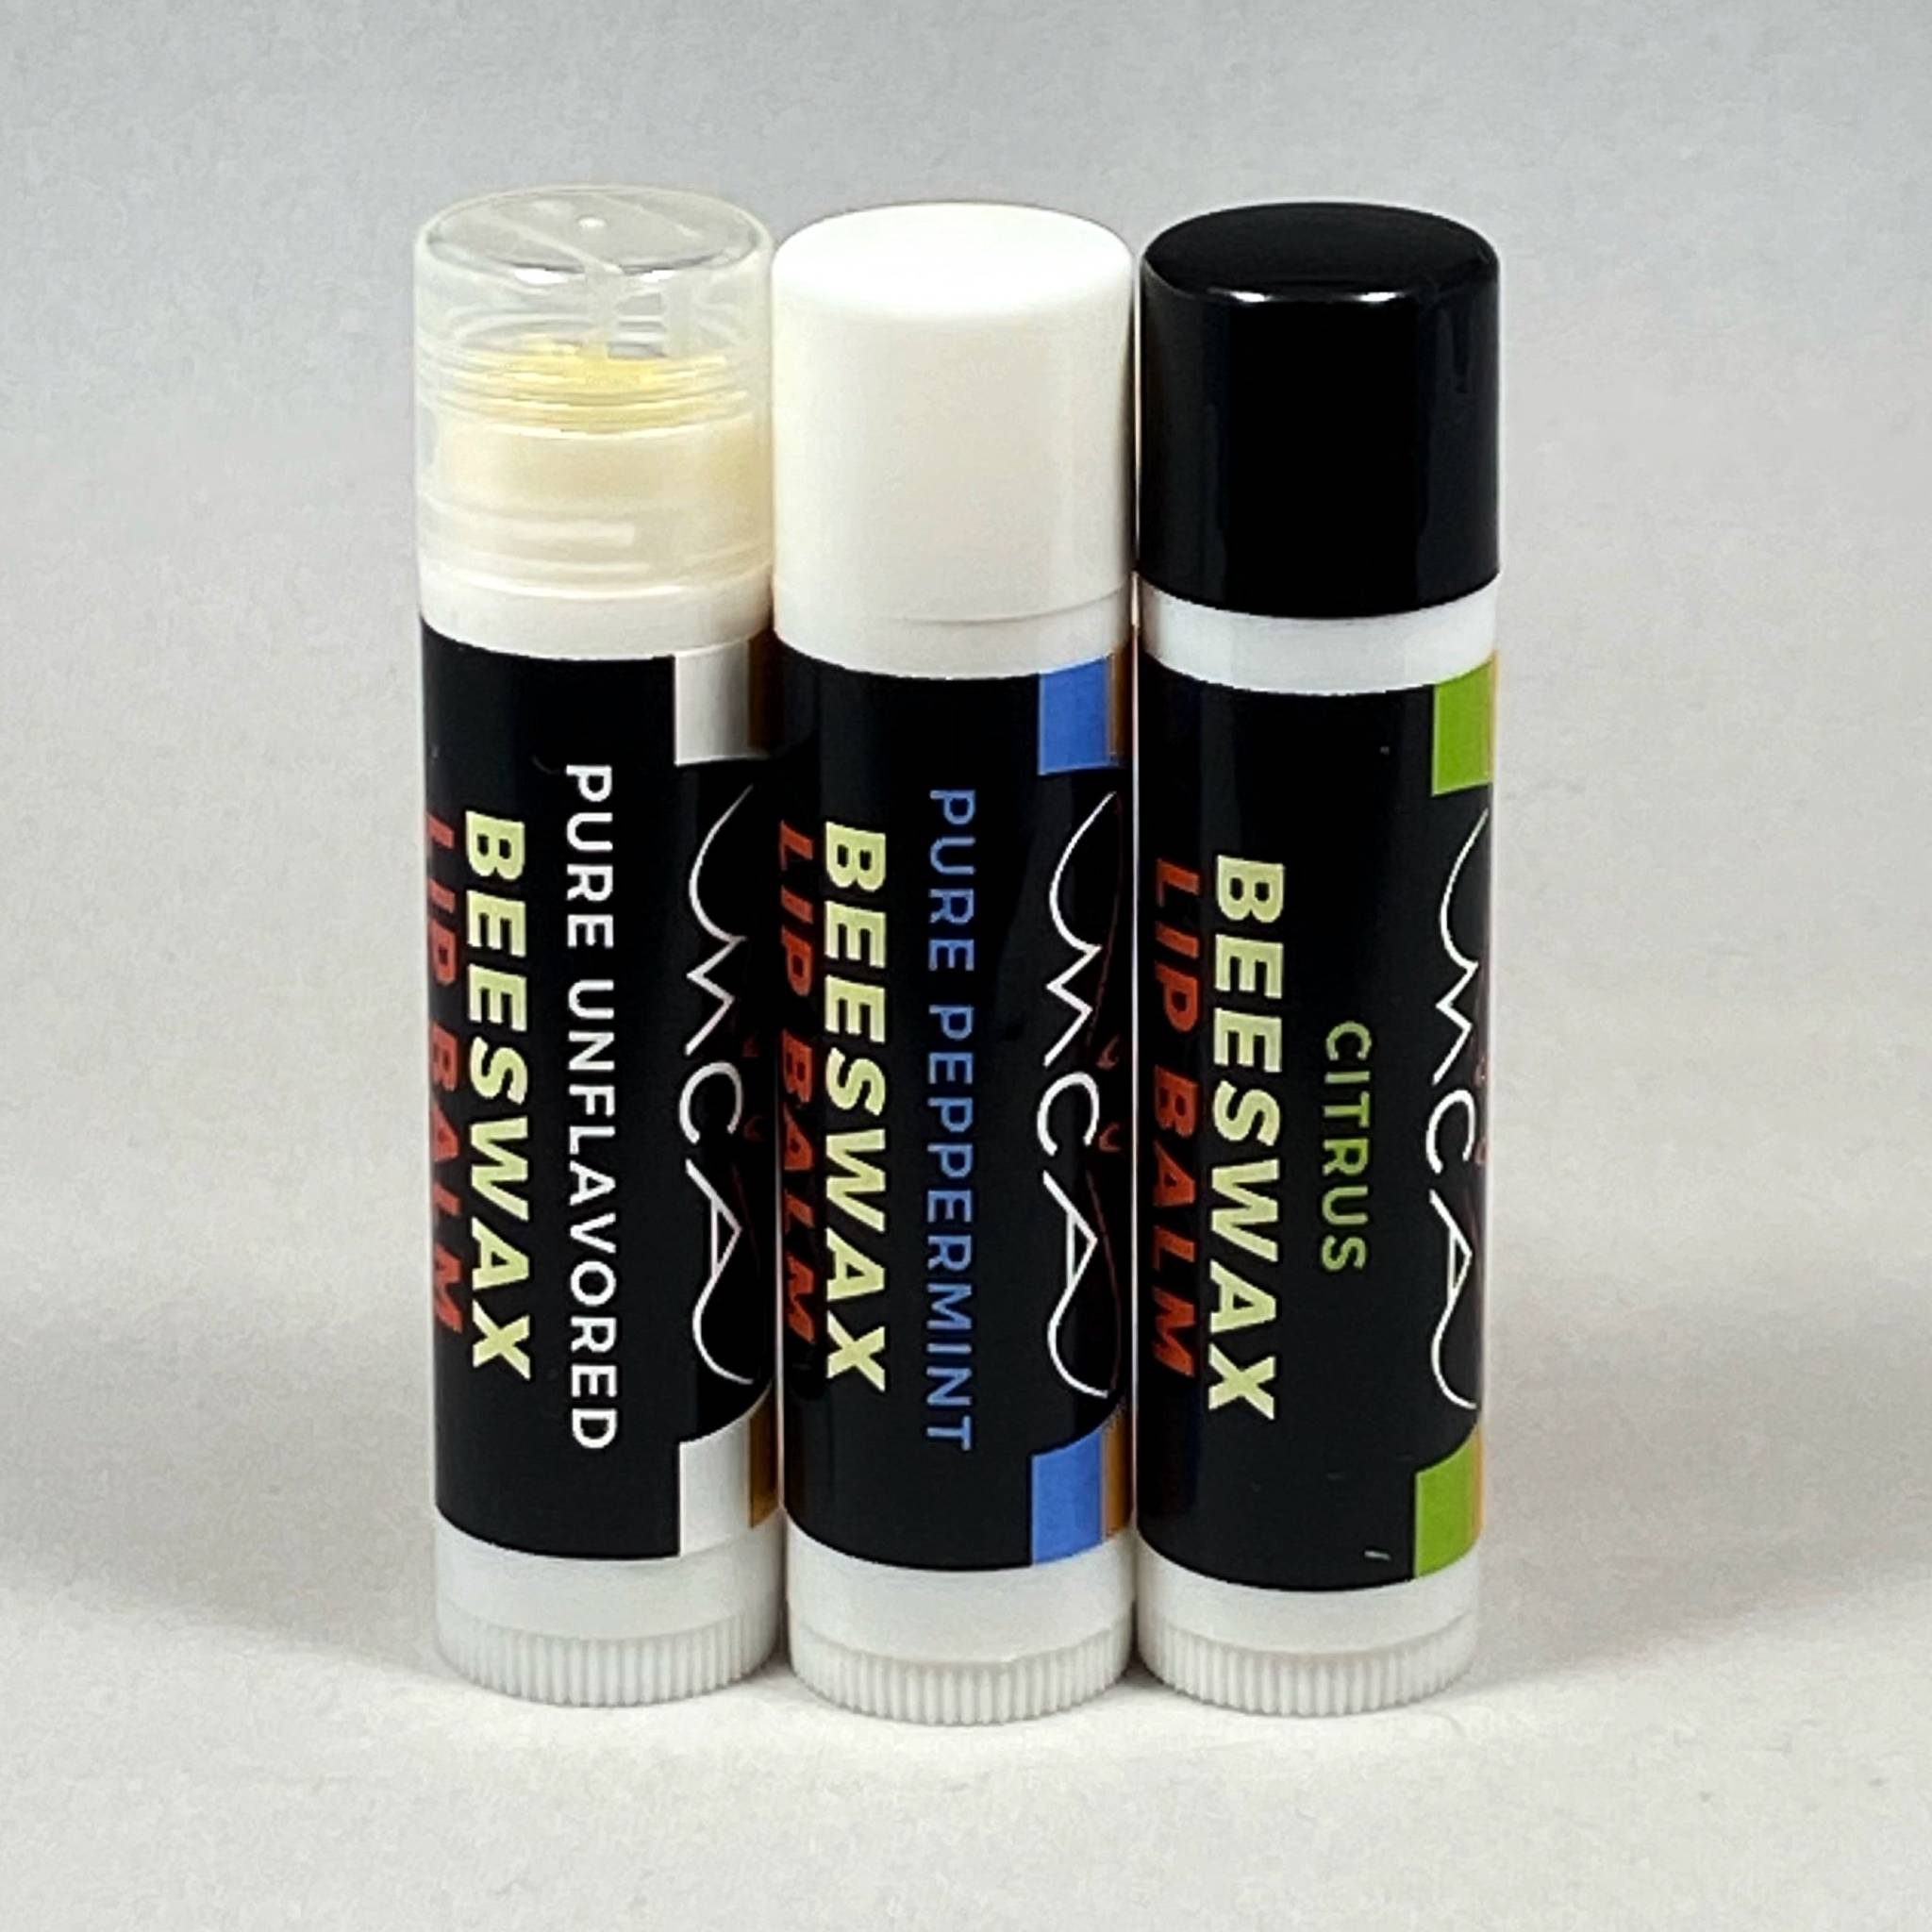 Mill Creek Apiary offers several beeswax lip balm options.